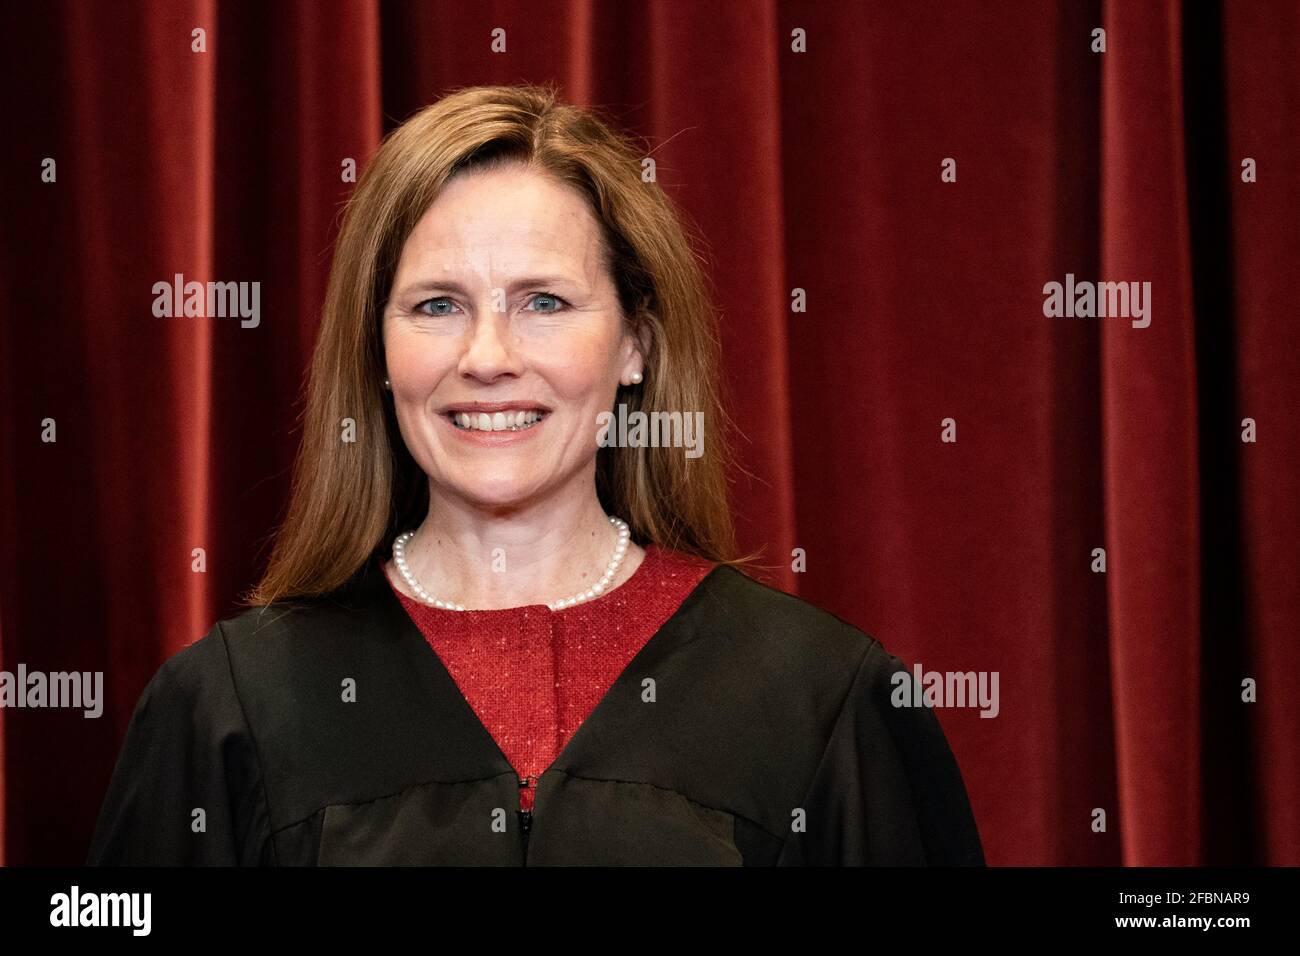 Washington, United States Of America. 23rd Apr, 2021. Associate Justice of the Supreme Court Amy Coney Barrett stands during a group photo of the Justices at the Supreme Court in Washington, DC on April 23, 2021. Credit: Erin Schaff/Pool via CNP | usage worldwide Credit: dpa/Alamy Live News Stock Photo